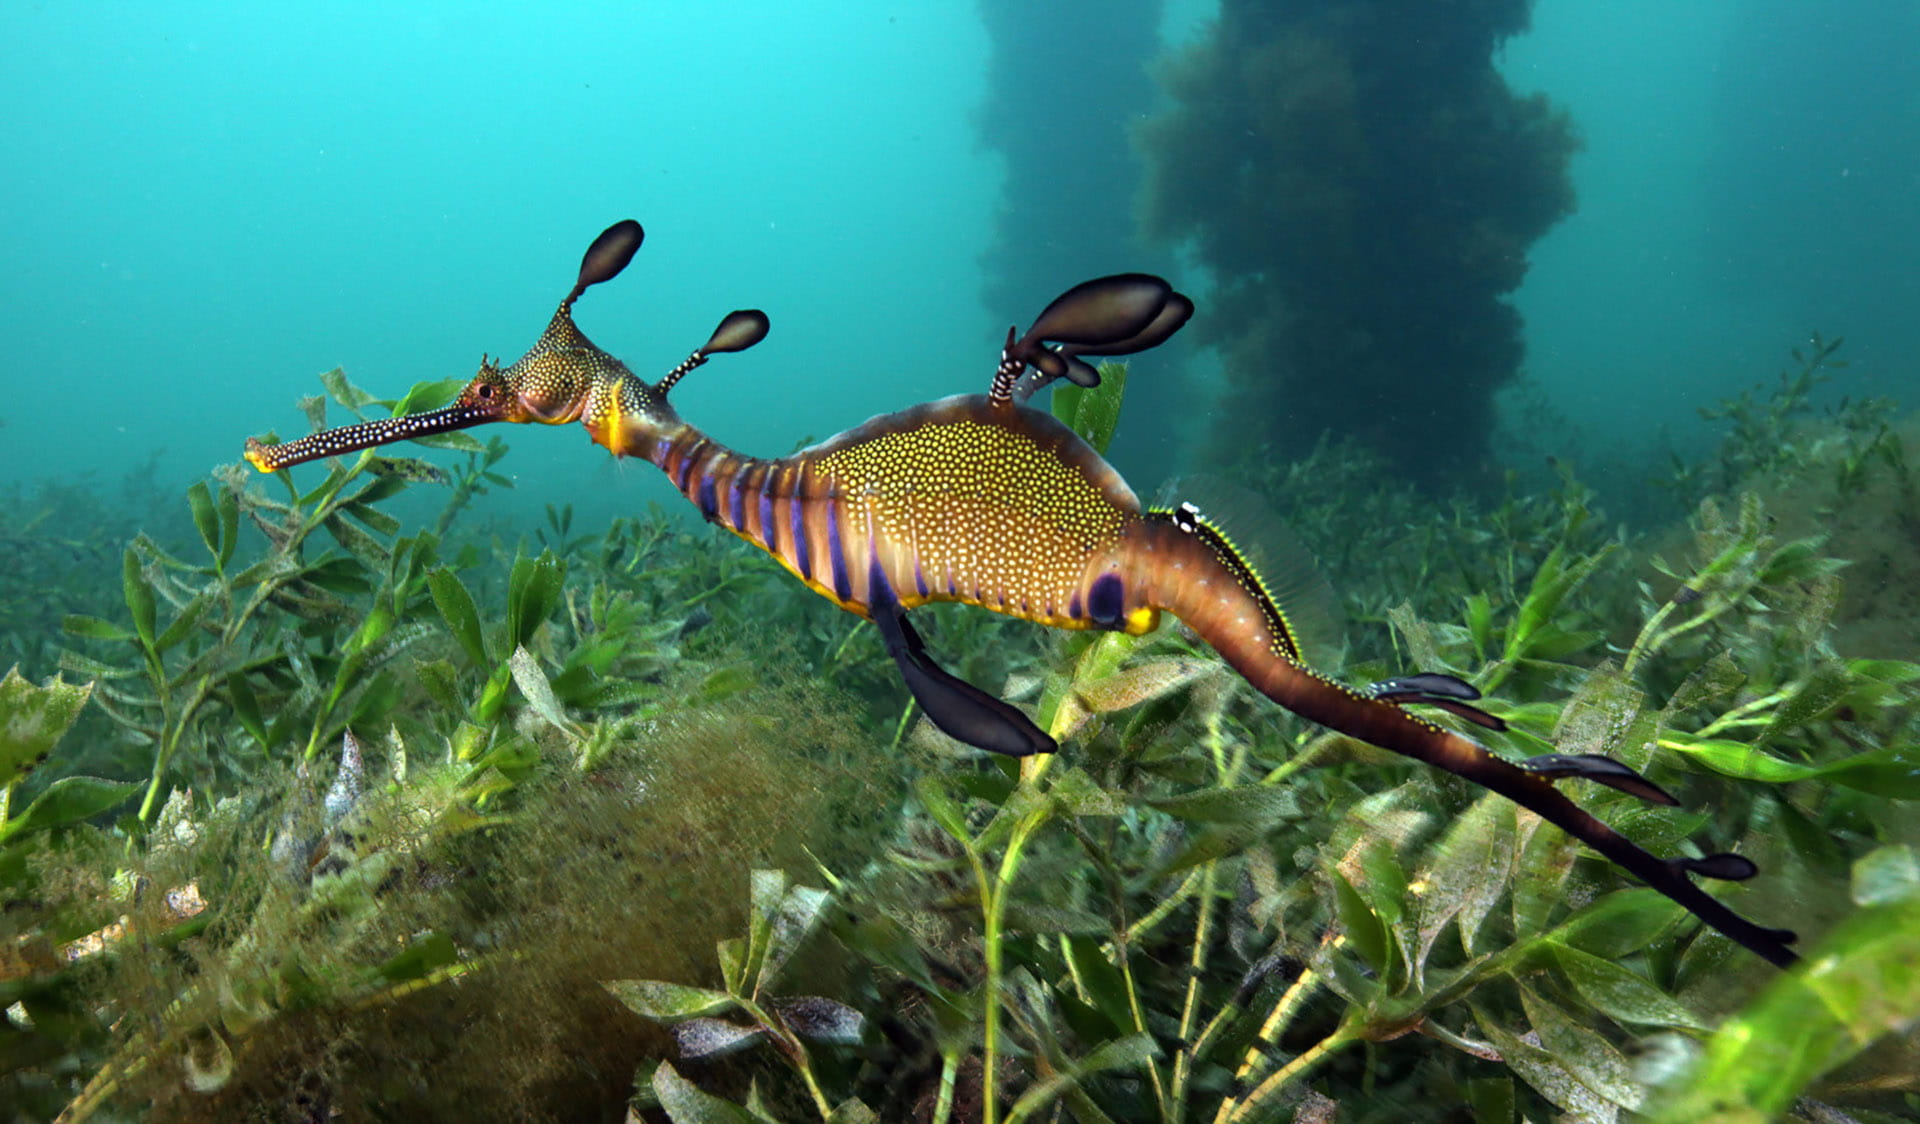 Underwater close up view of a weedy sea dragon swimming above seaweed